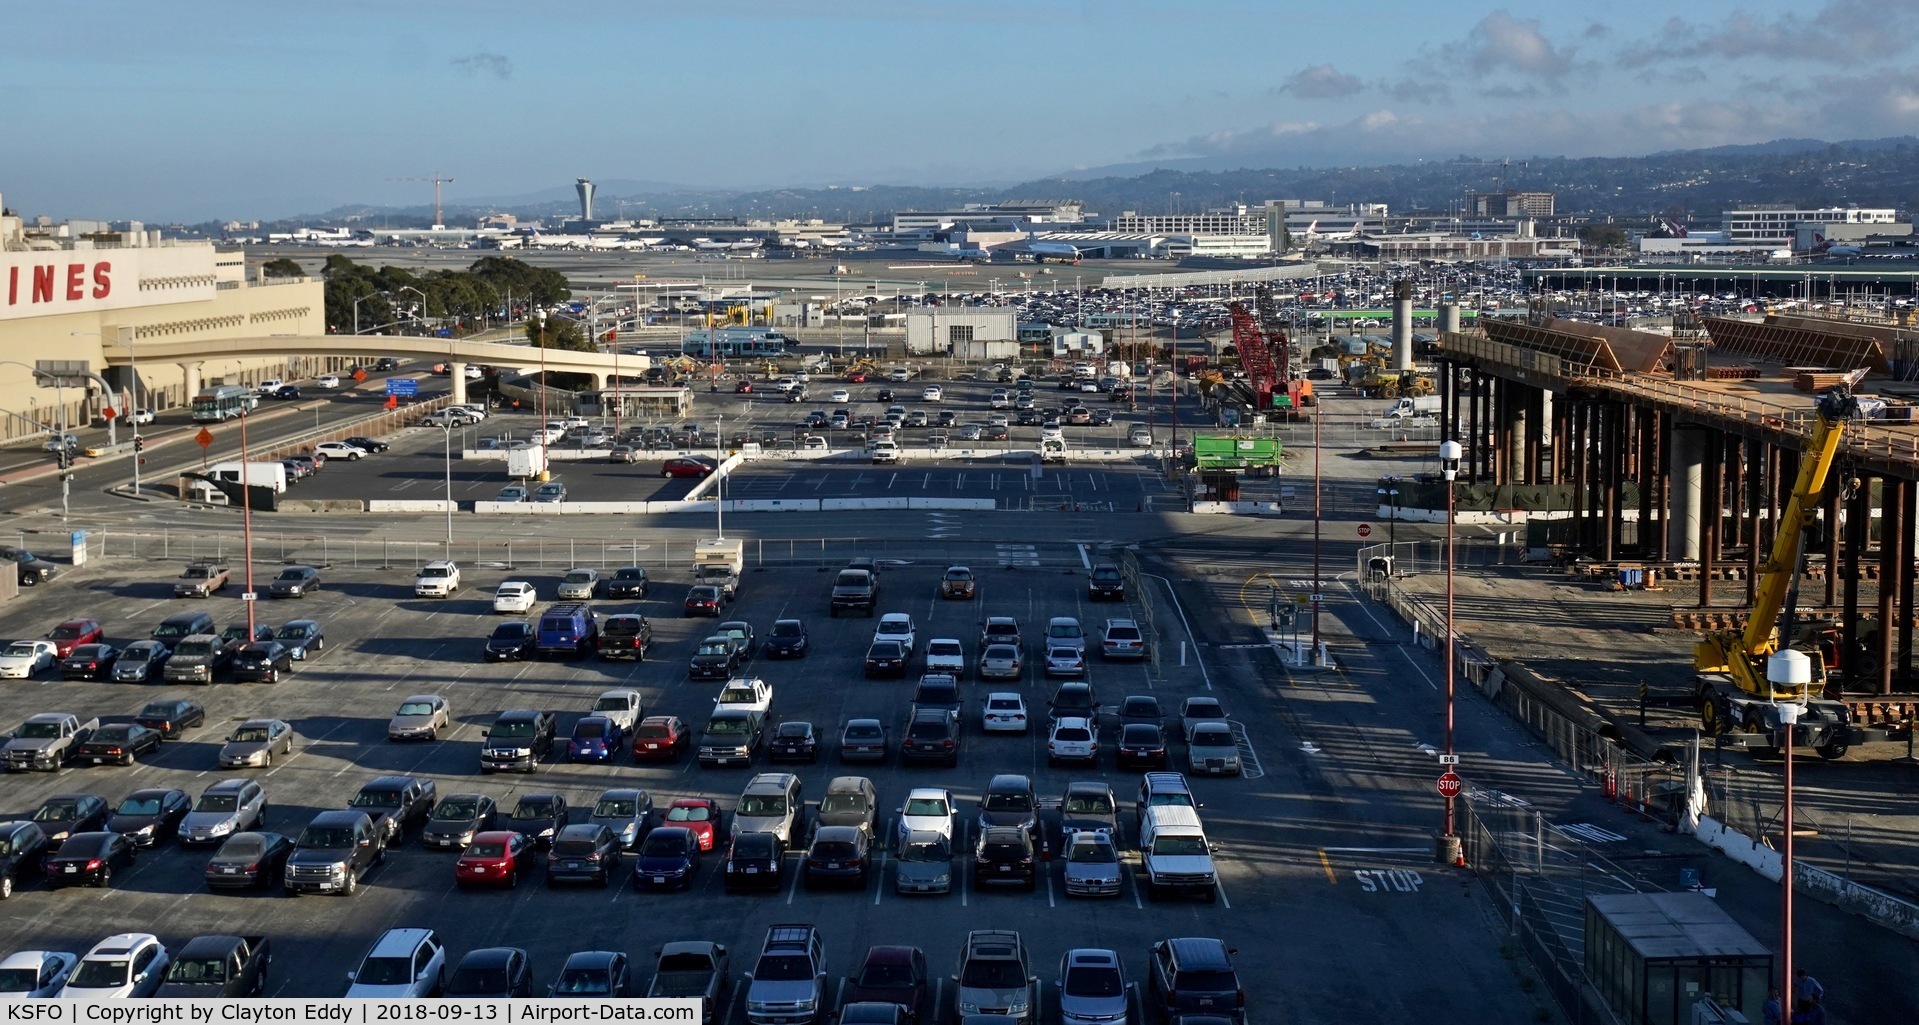 San Francisco International Airport (SFO) - Tram being built for long term and rental car parking areas. SFO 2018.